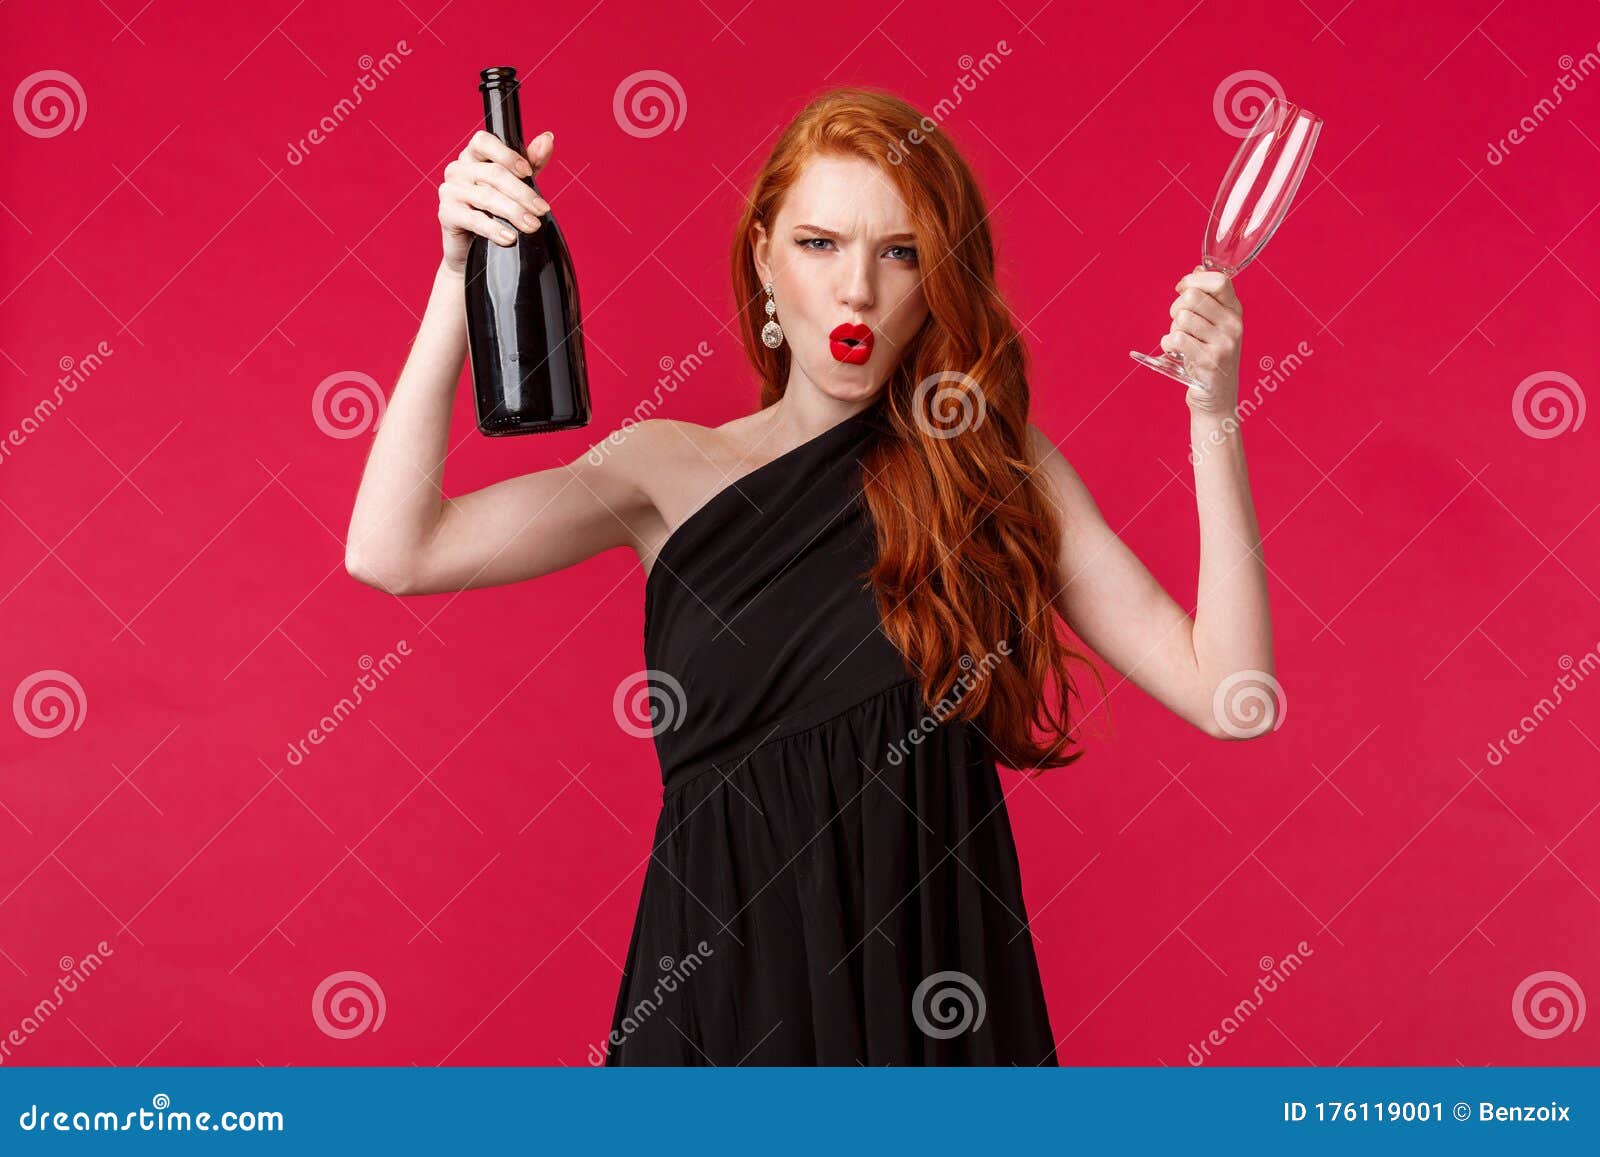 Celebration Holidays And Women Concept Sassy And Carefree Excited Young Redhead Woman Having